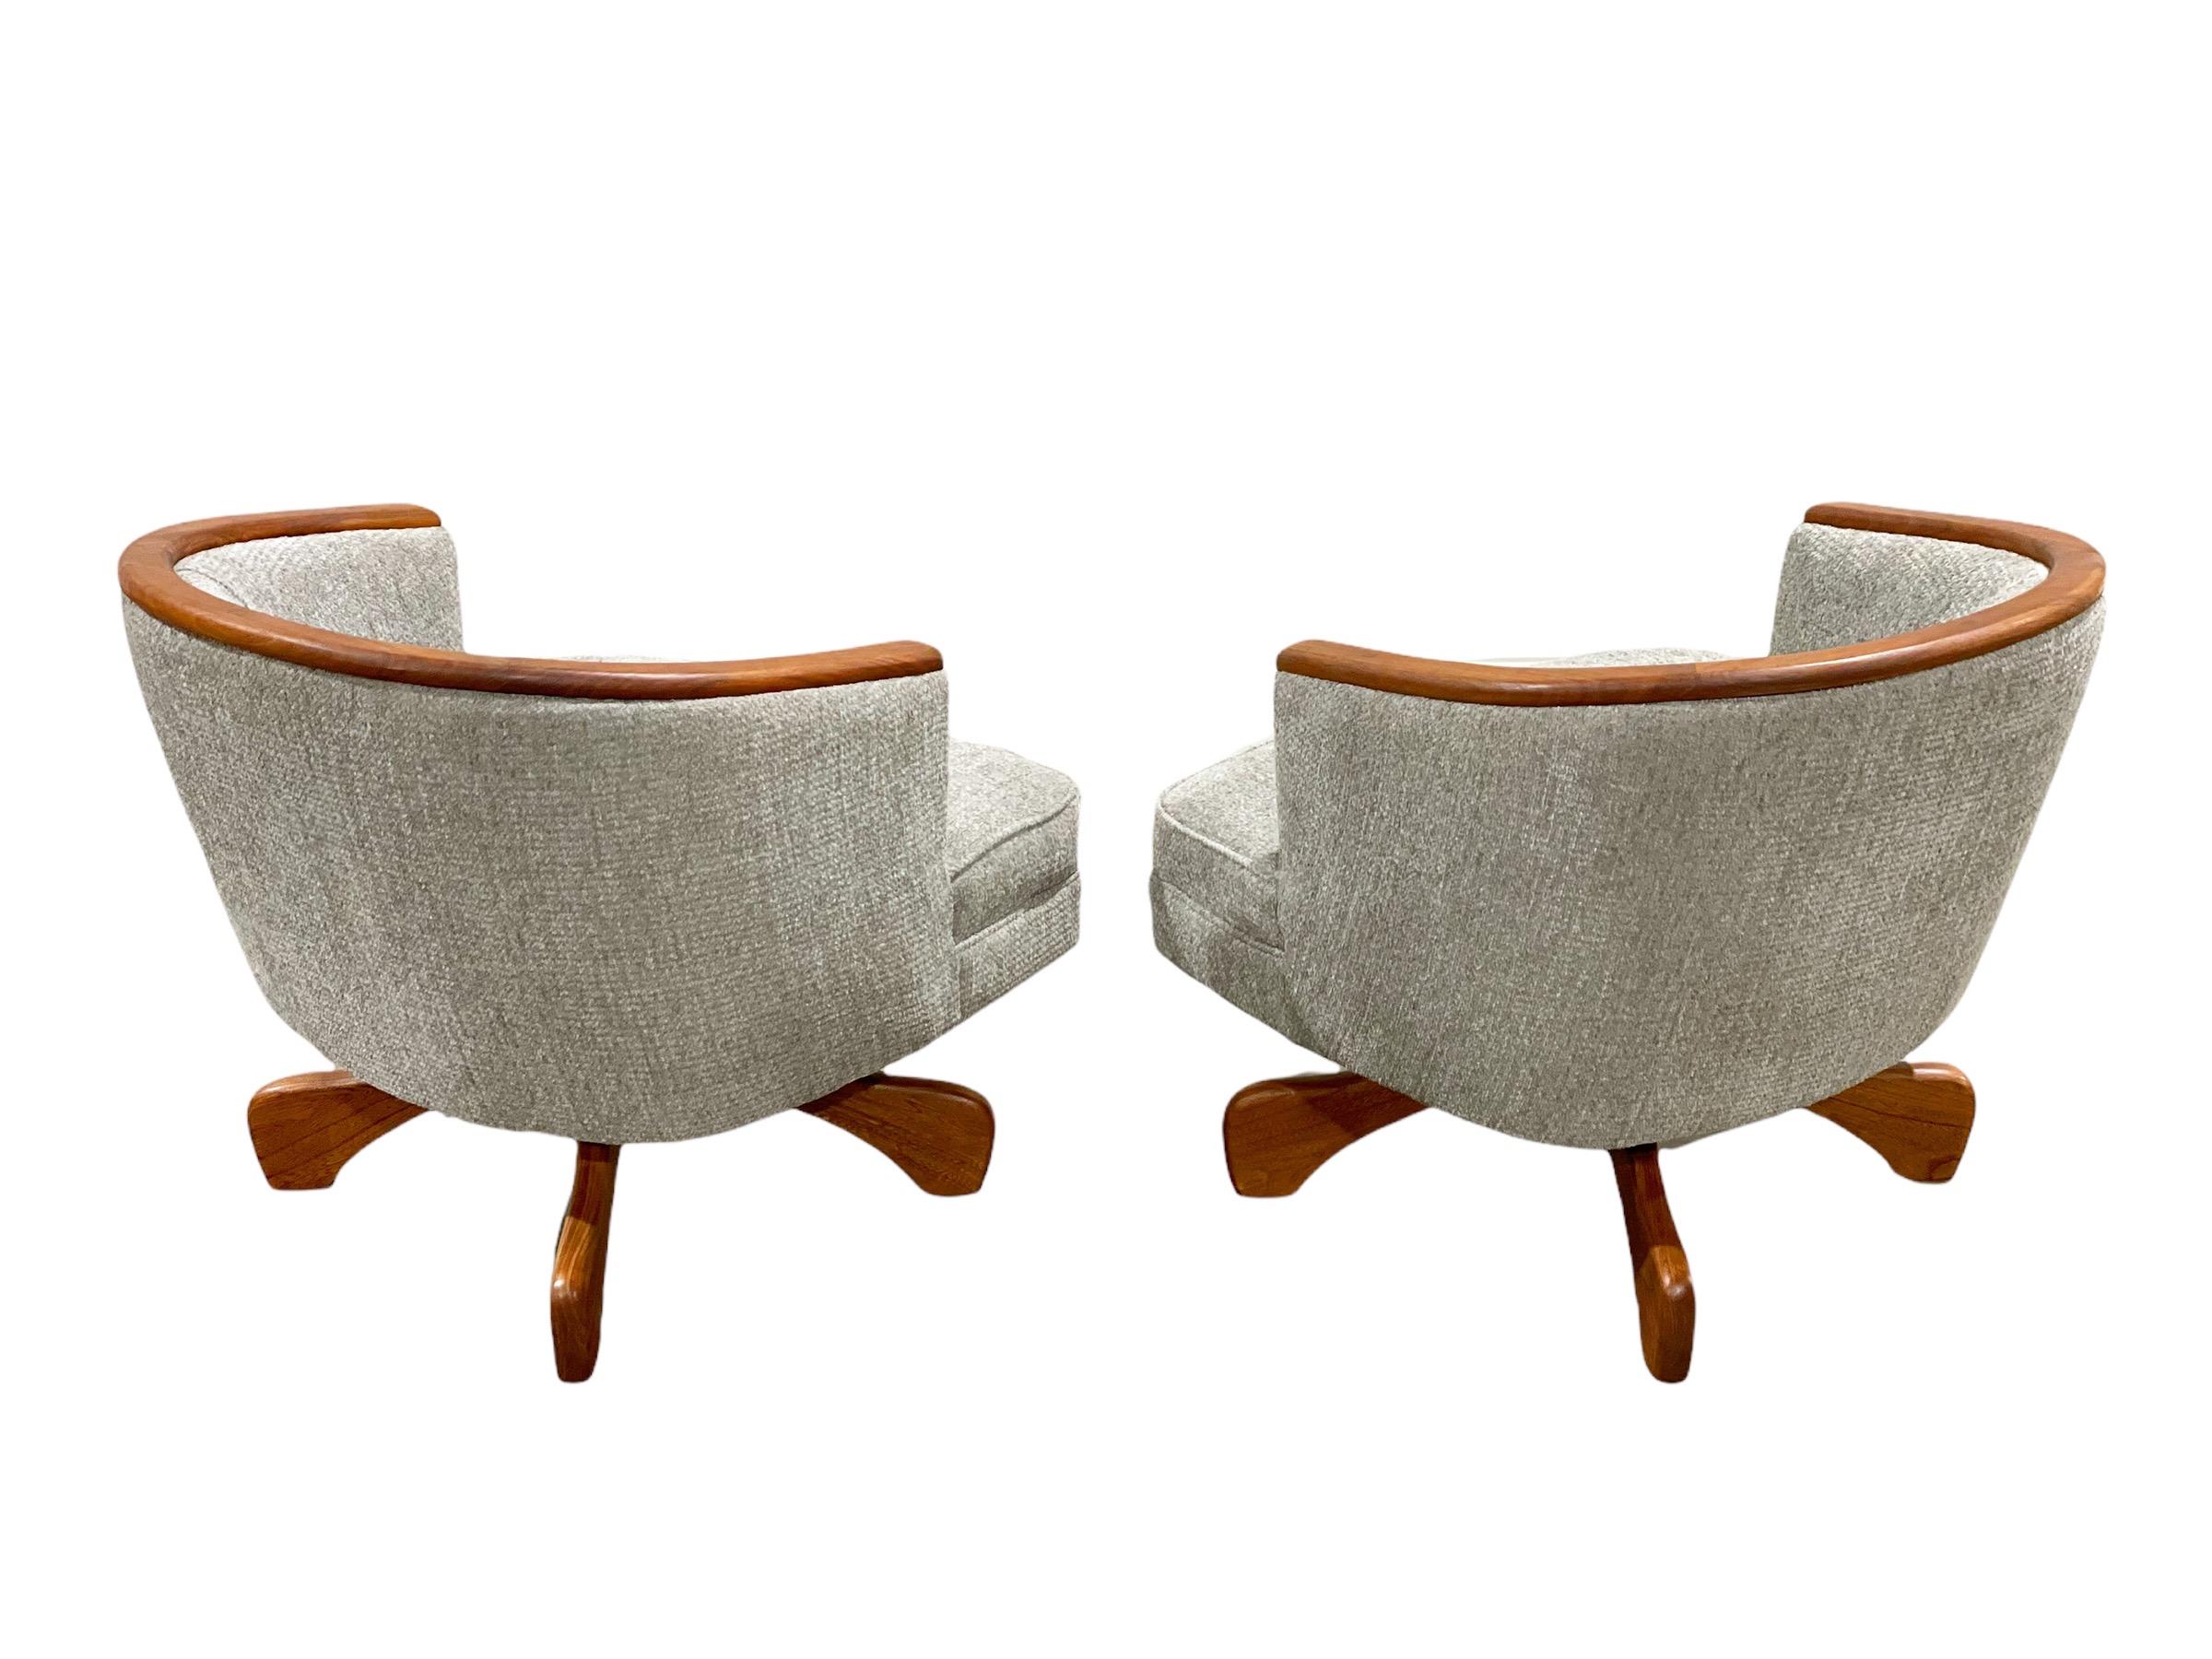 Mid-20th Century Midcentury Swivel Club Barrel Chairs After Adrian Pearsall, Walnut + Boucle